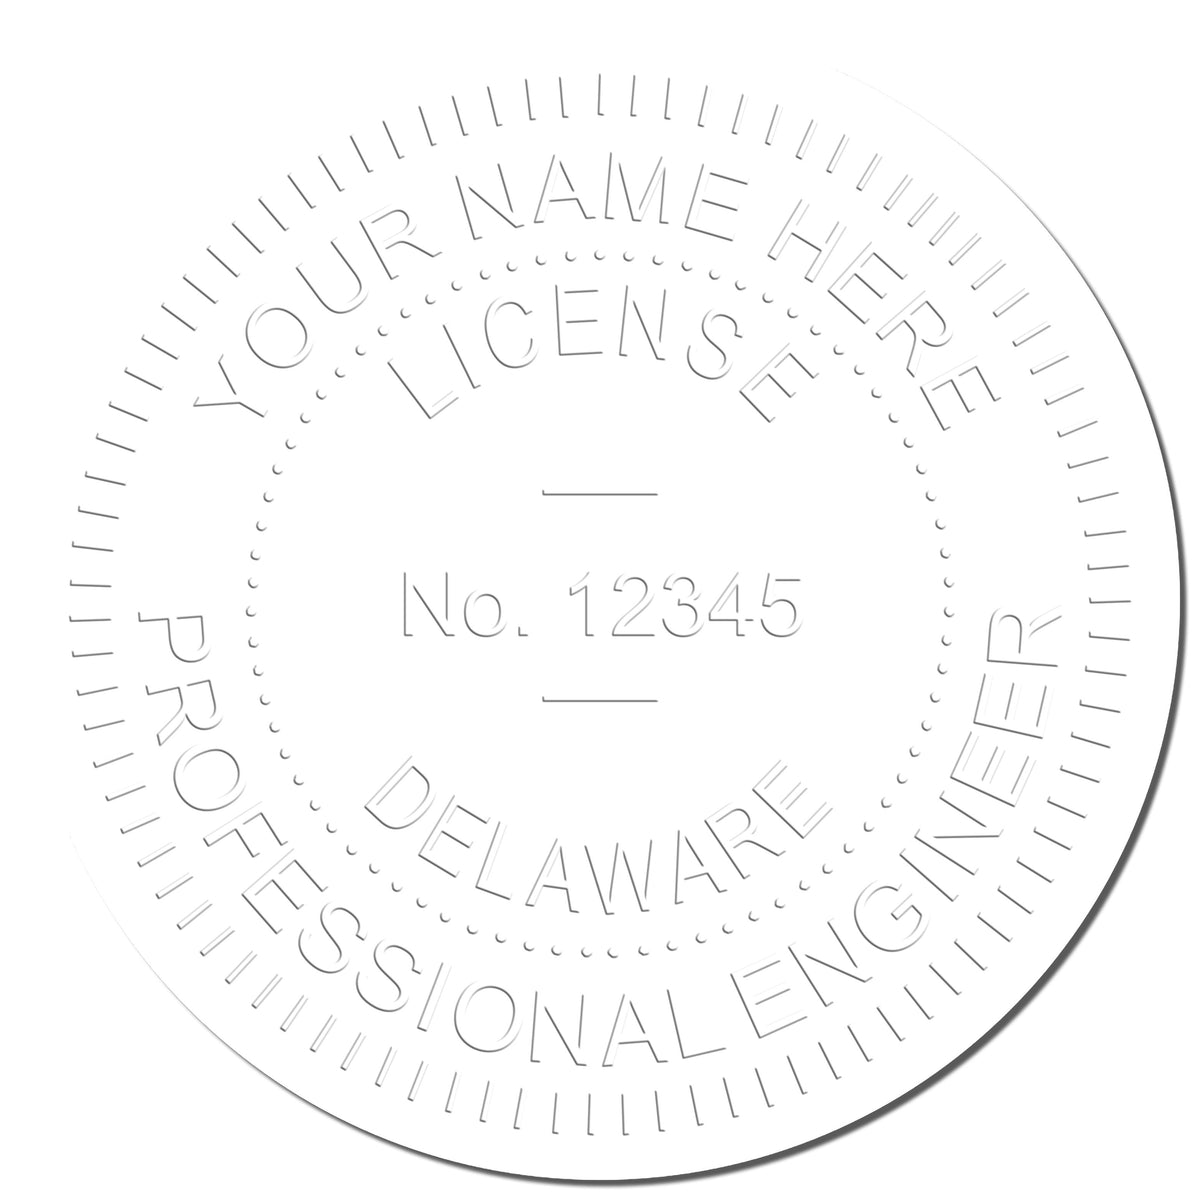 Another Example of a stamped impression of the Delaware Engineer Desk Seal on a piece of office paper.